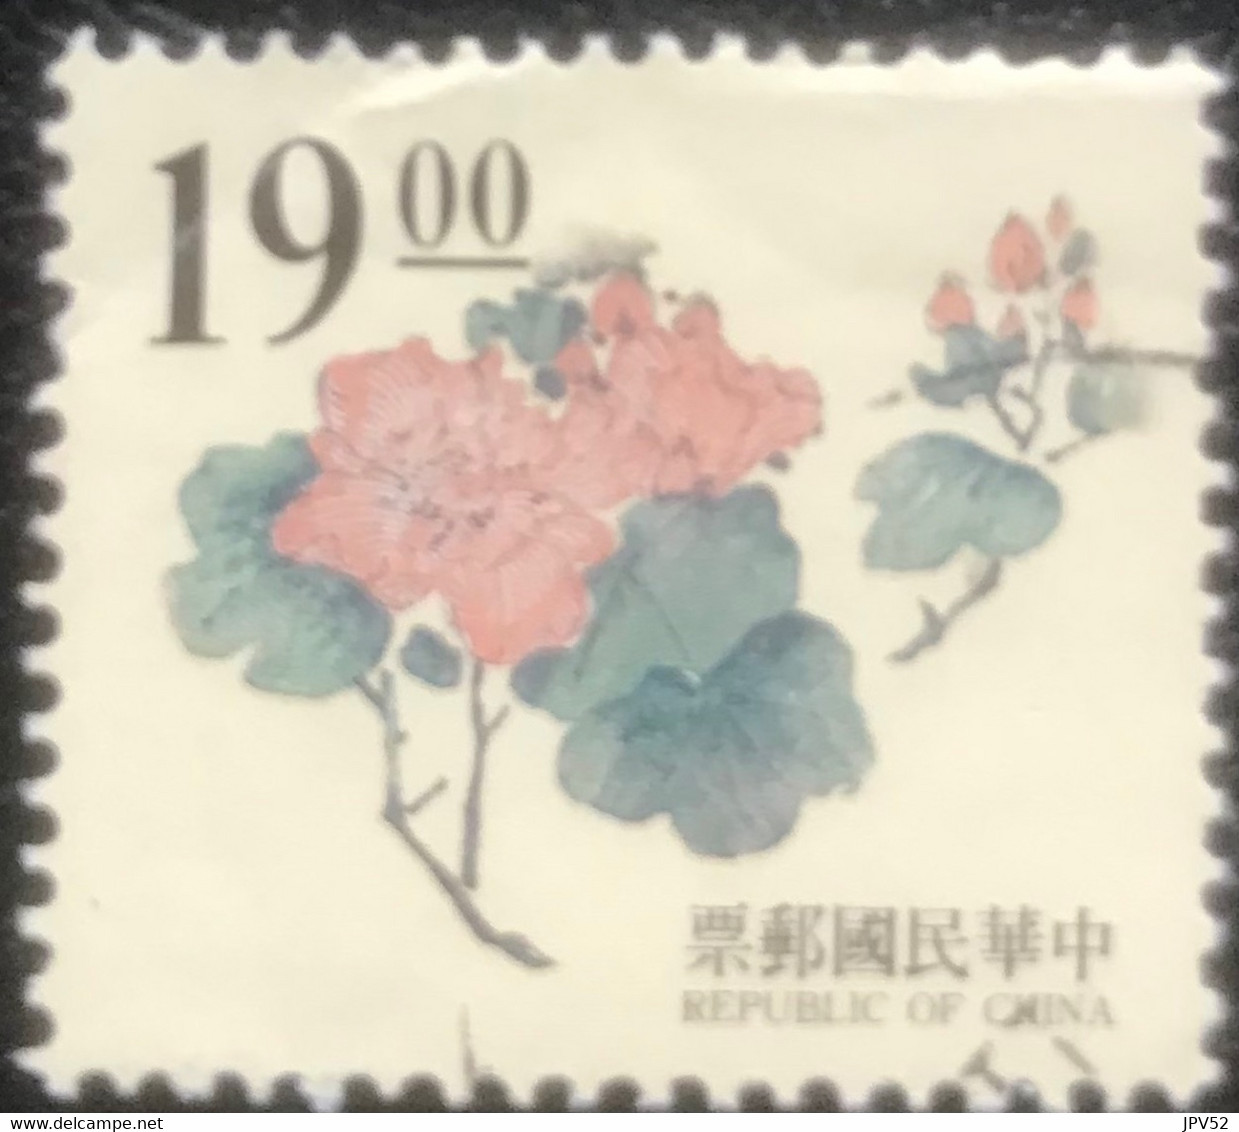 Republic Of China - Taiwan - C6/11 - (°)used - 1995 - Michel 2219 - Oude Chinese Gravures - Used Stamps